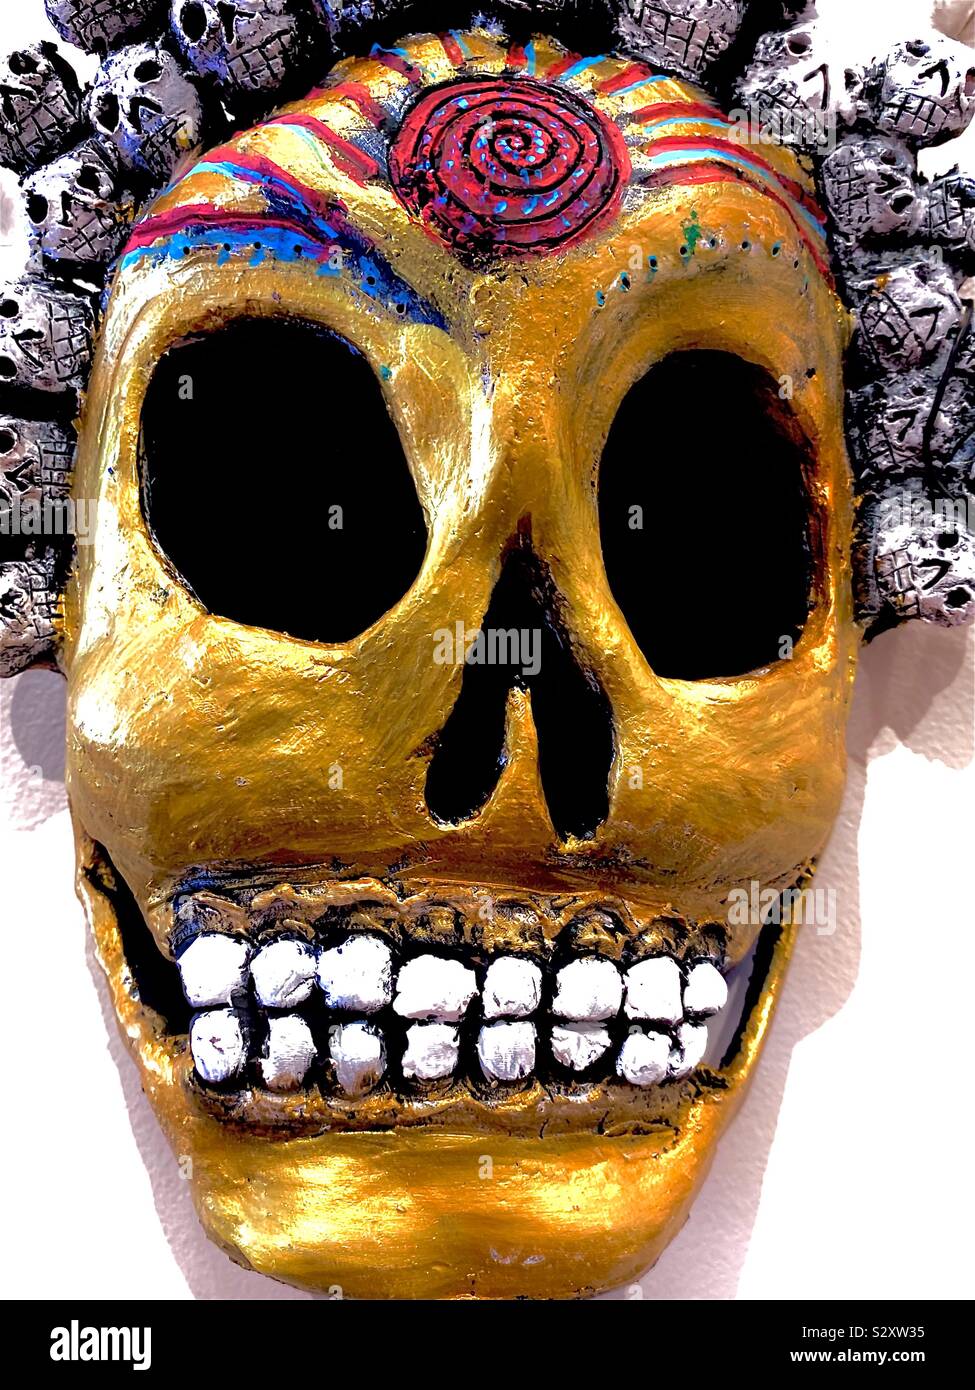 Mask for dia de los muertos Day of the Dead in Mexico Stock Photo - Alamy